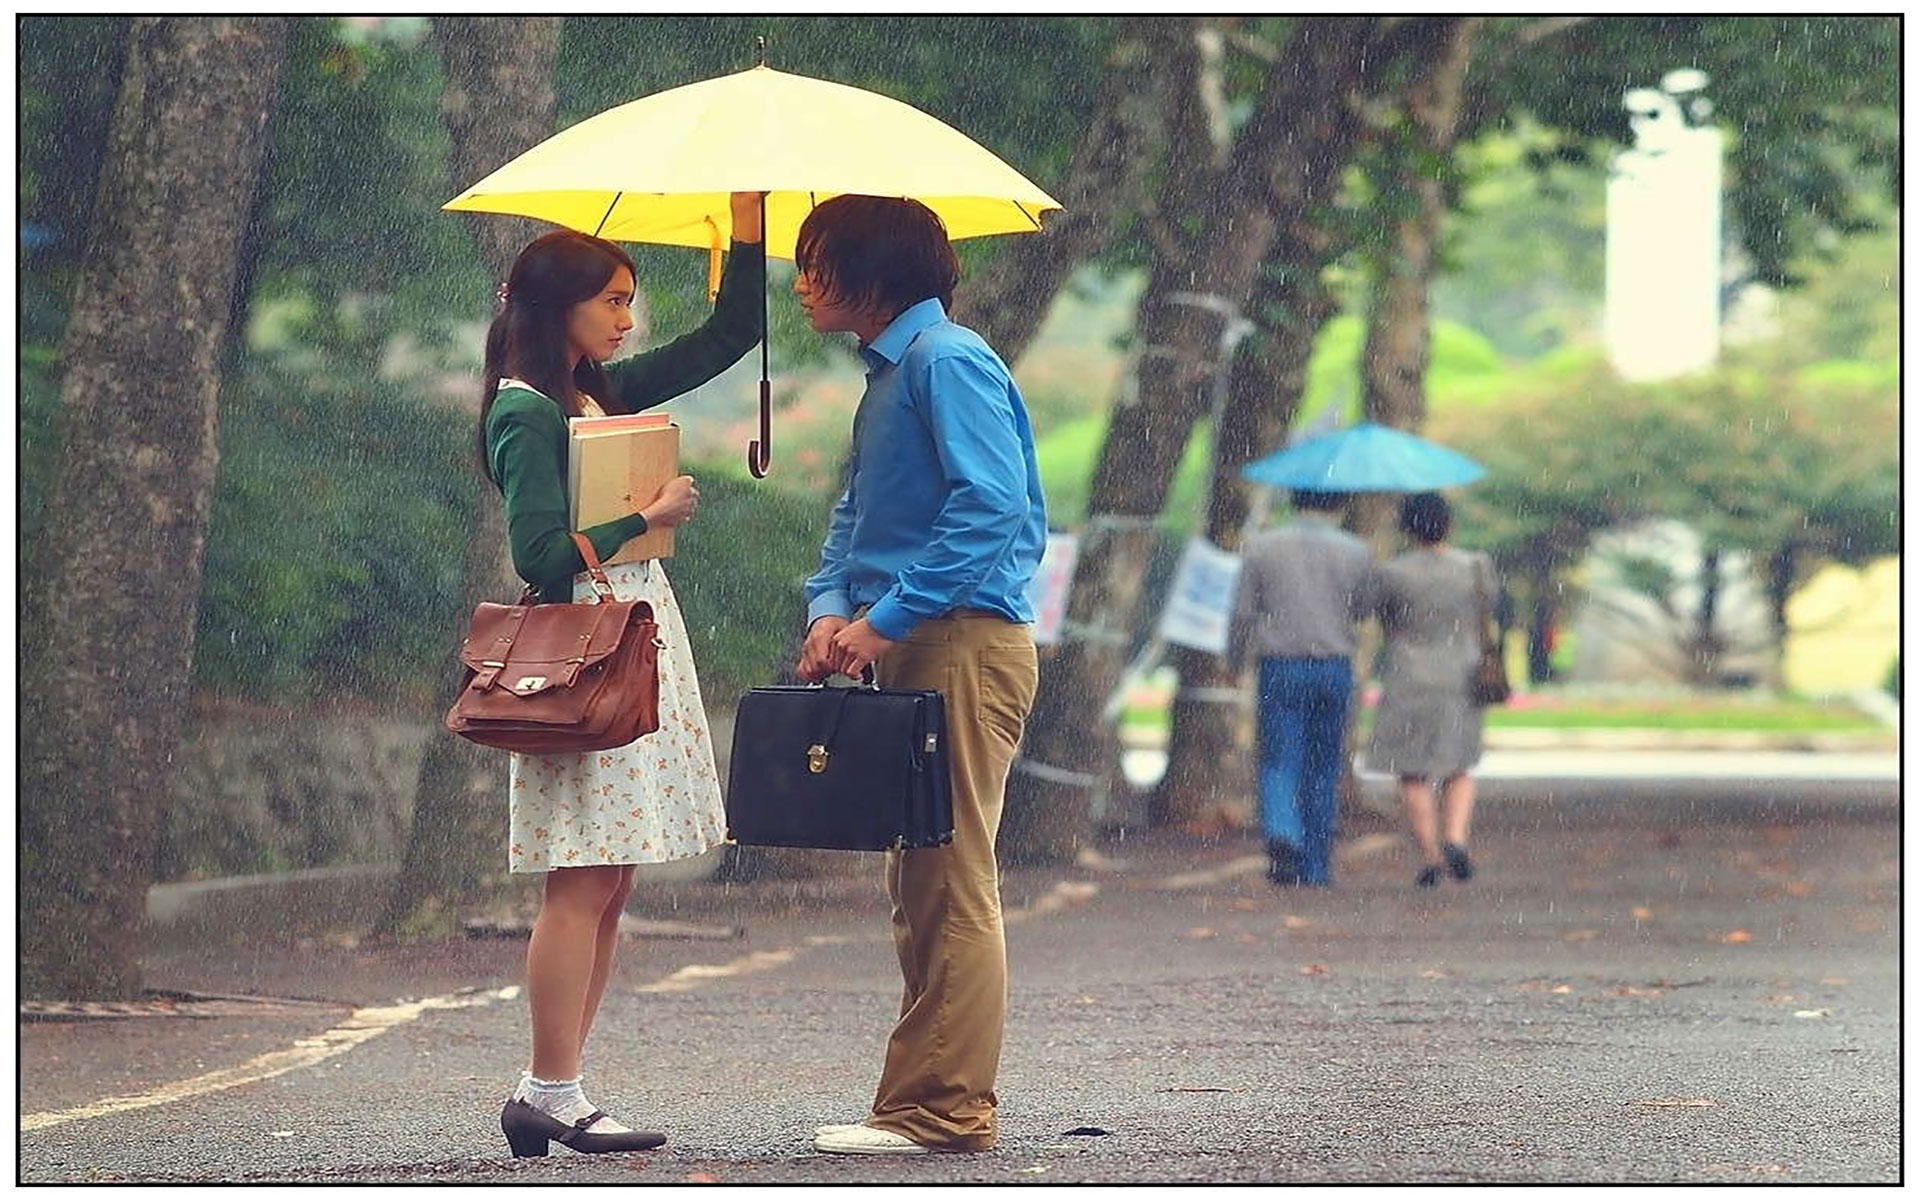 First Impression Of Love In A Rainy Day